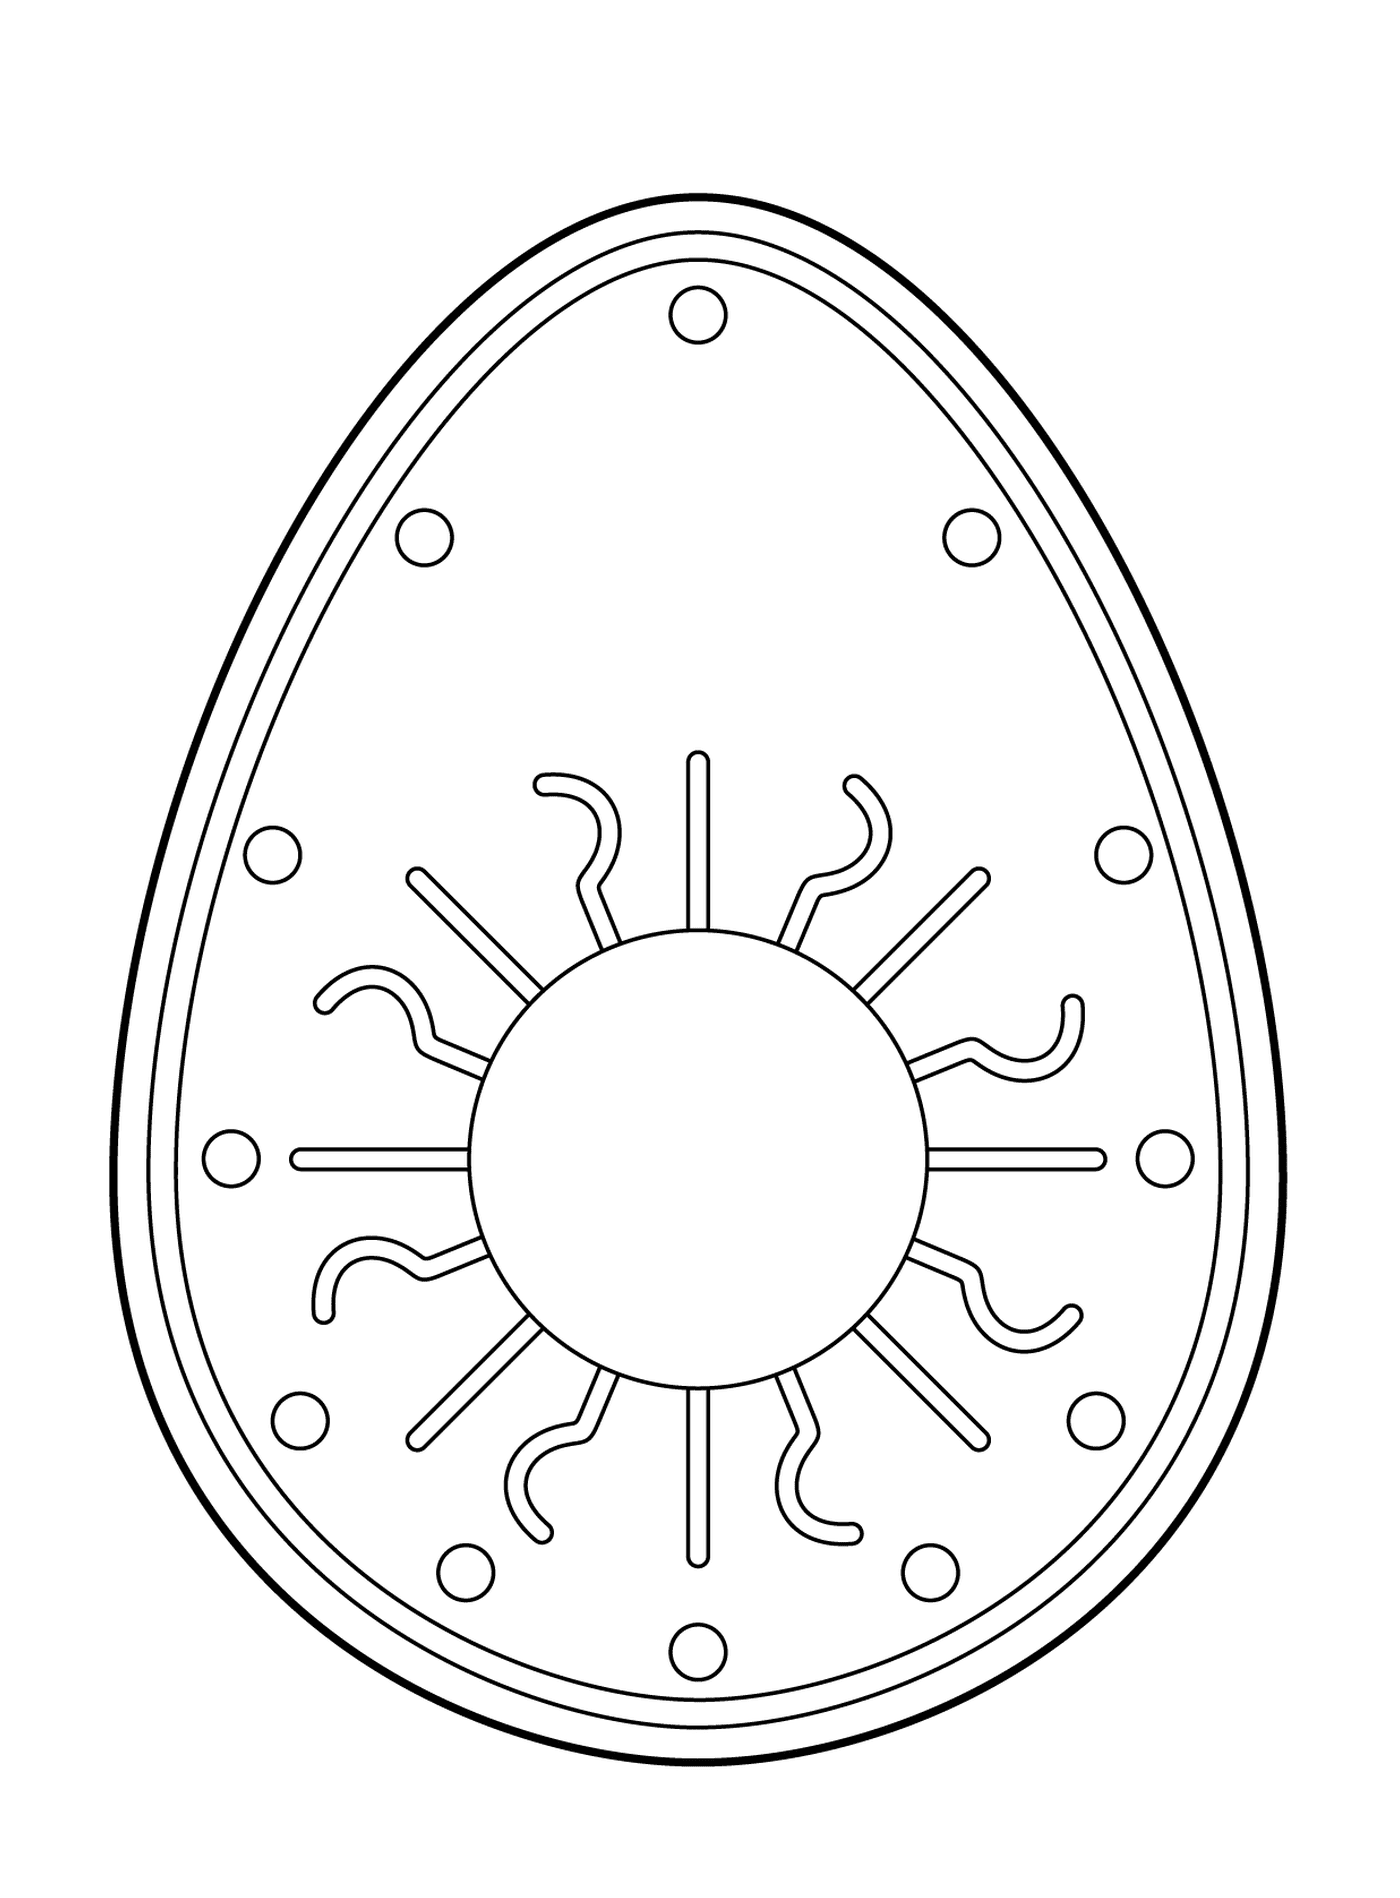  Easter egg in the shape of a decorative sun 